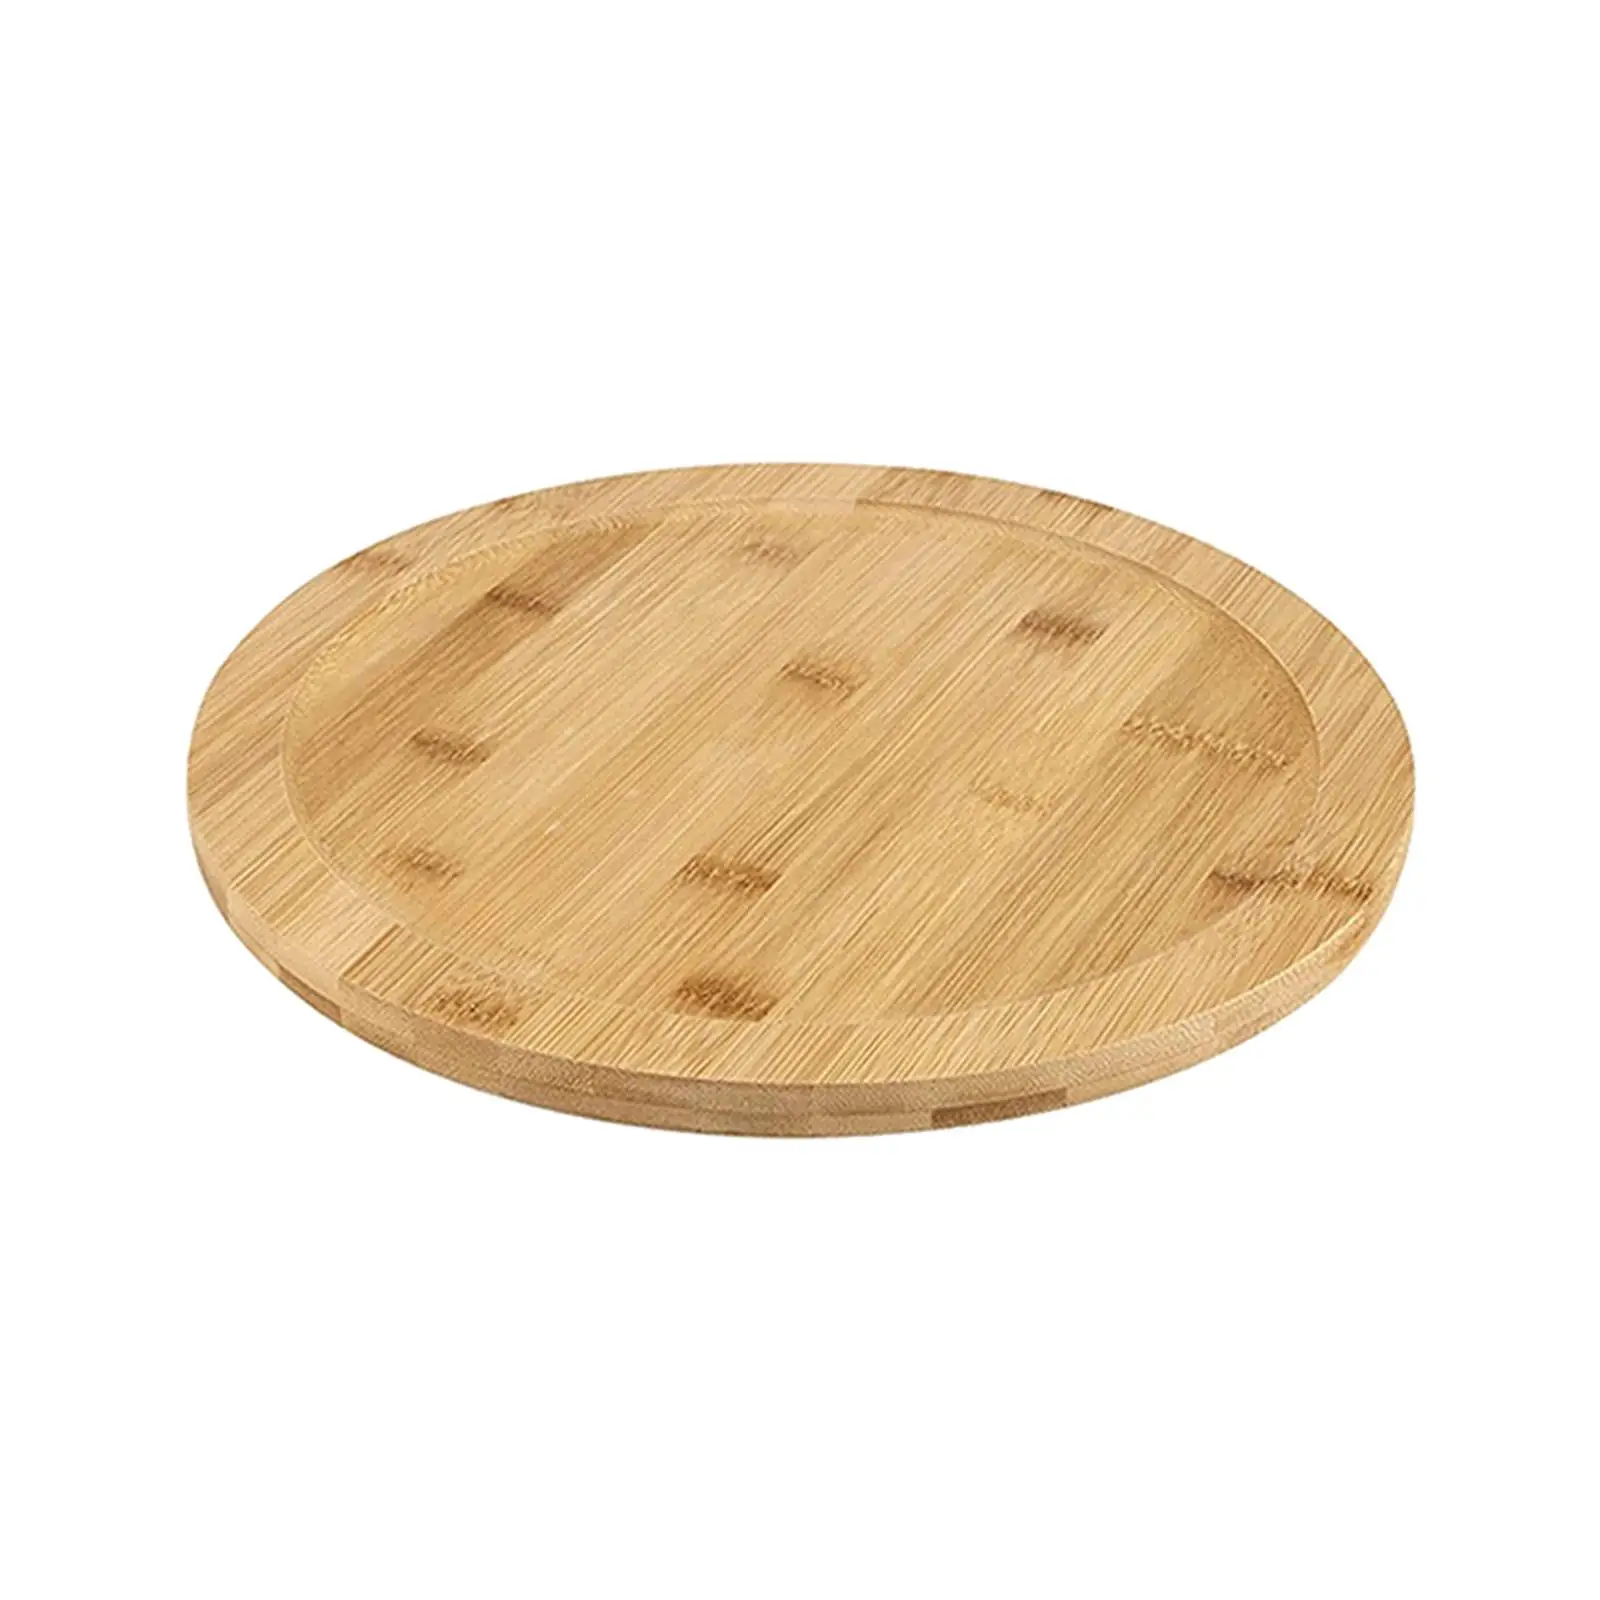 Wooden Rotating Dining Plate Rotating Board Multipurpose Serving Tray Wooden Turntable for Home Cabinet Kitchen Dining Table